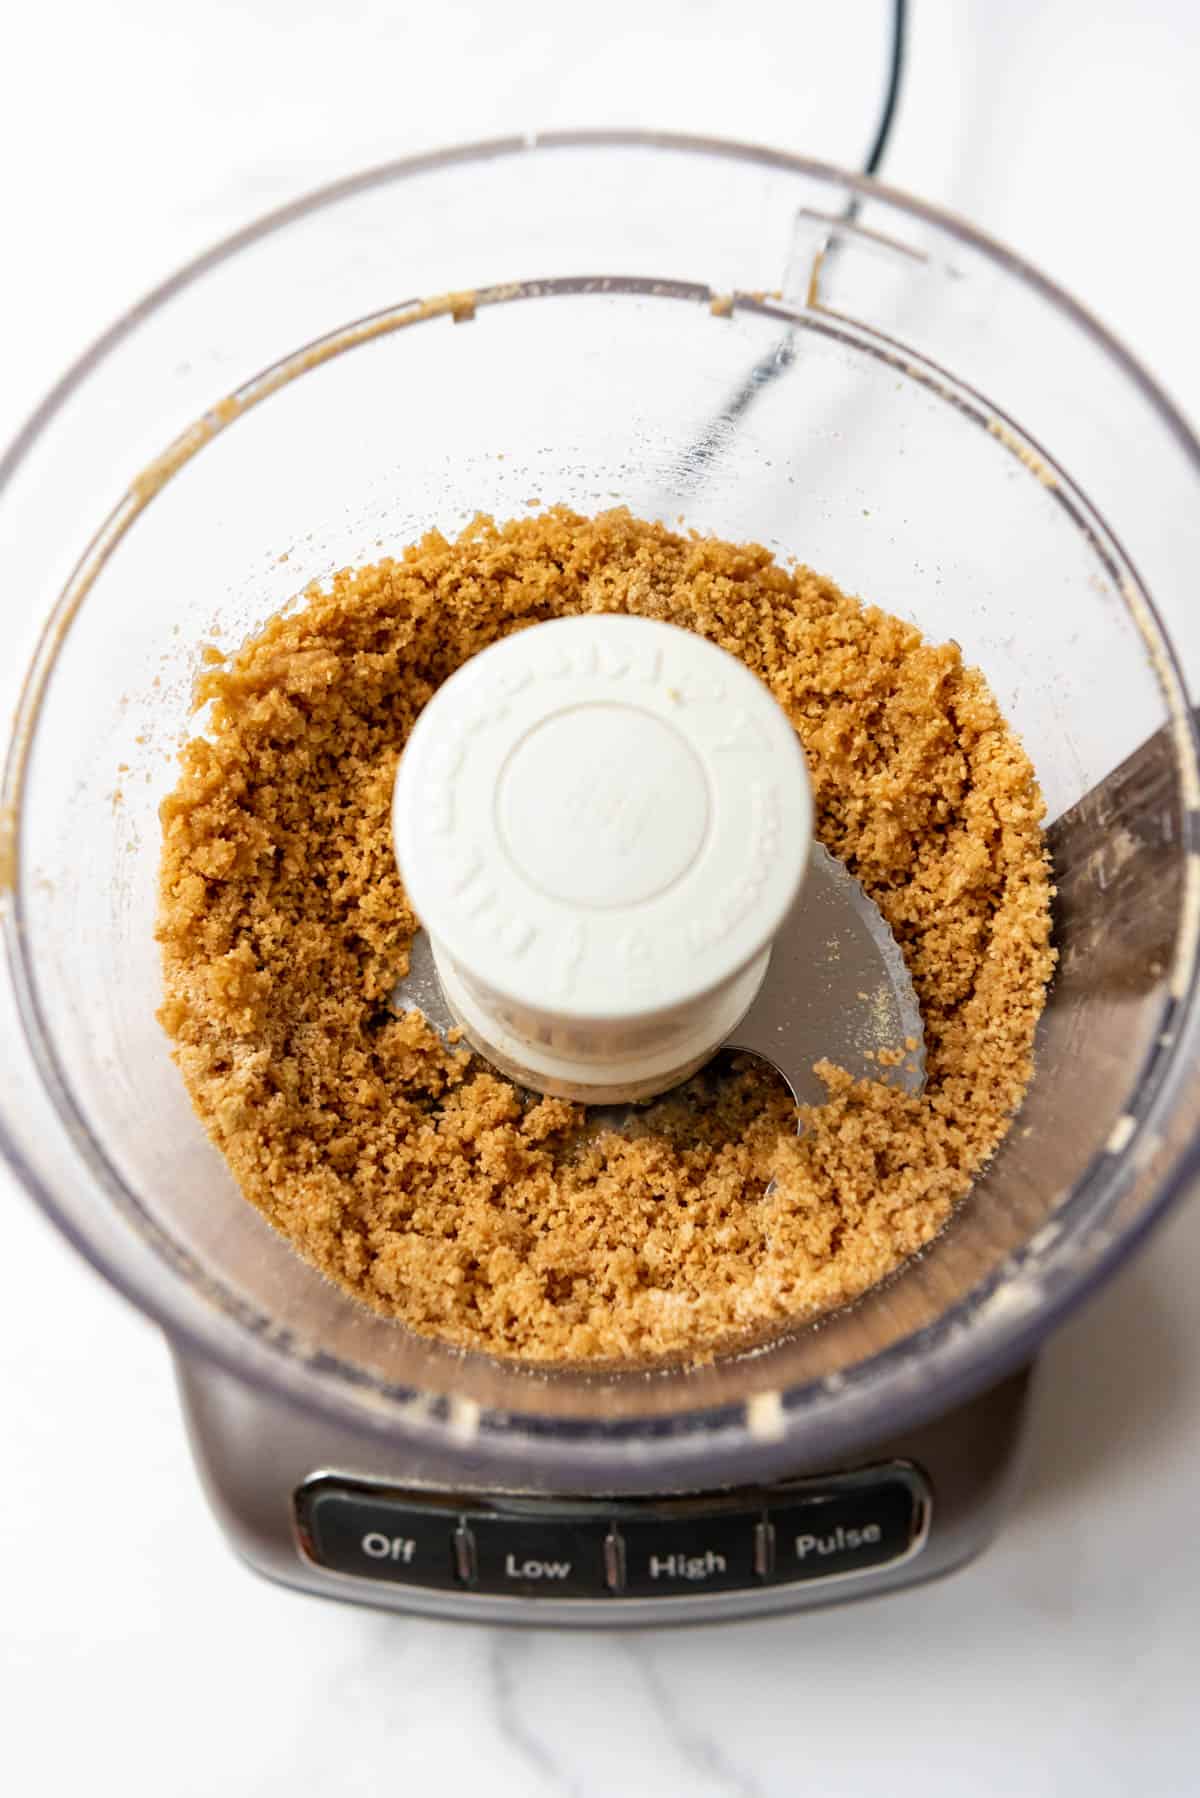 Top view of a food processor with Graham Cracker crumbs in it.